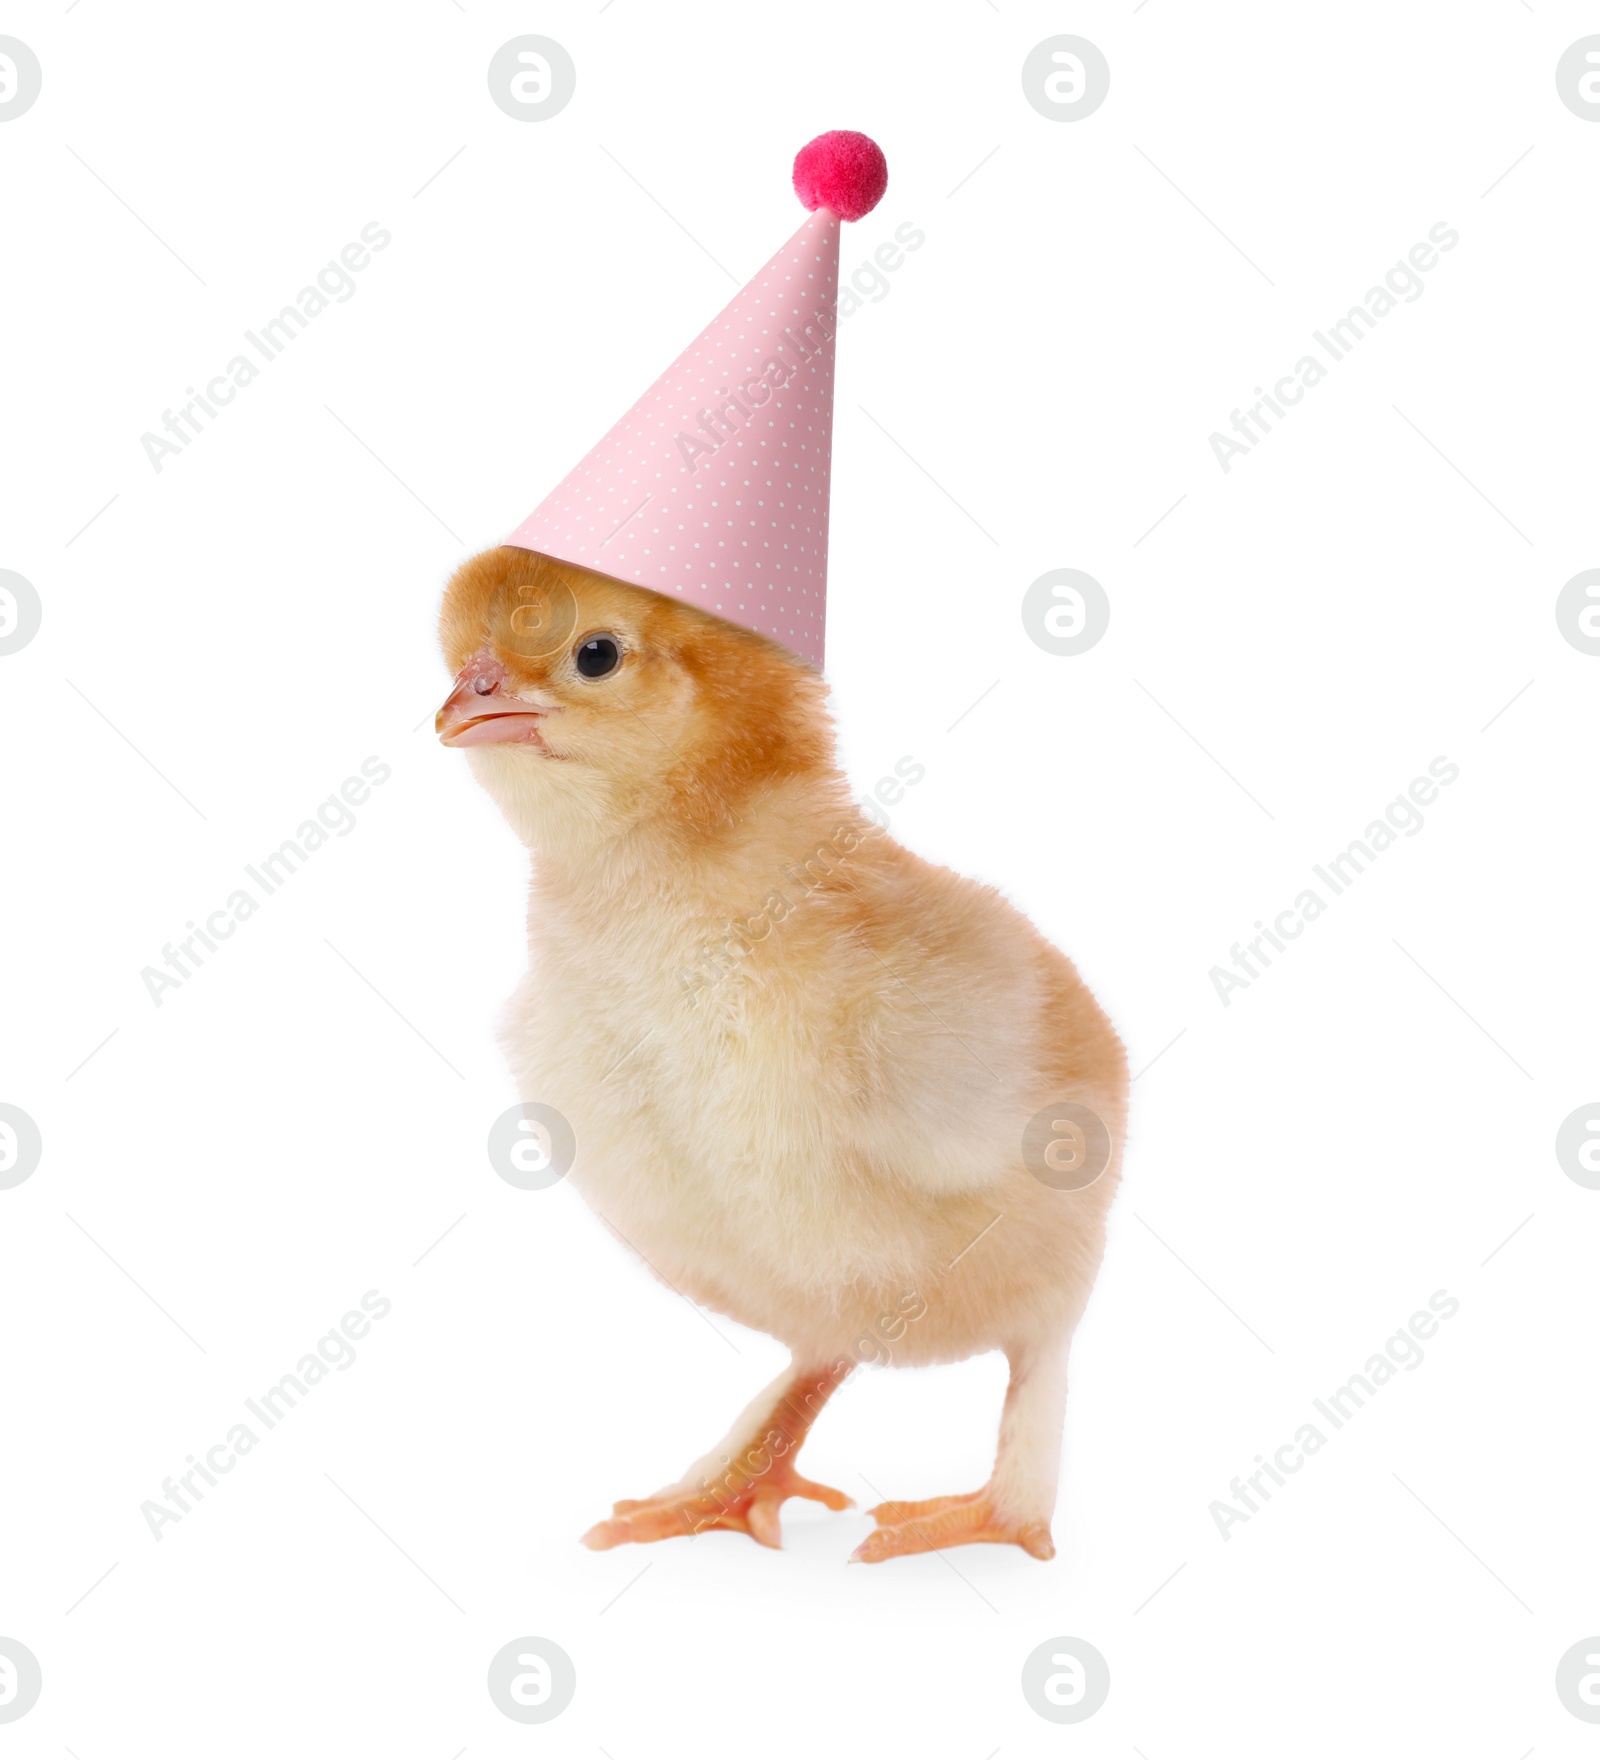 Image of Cute chicken with party hat on white background